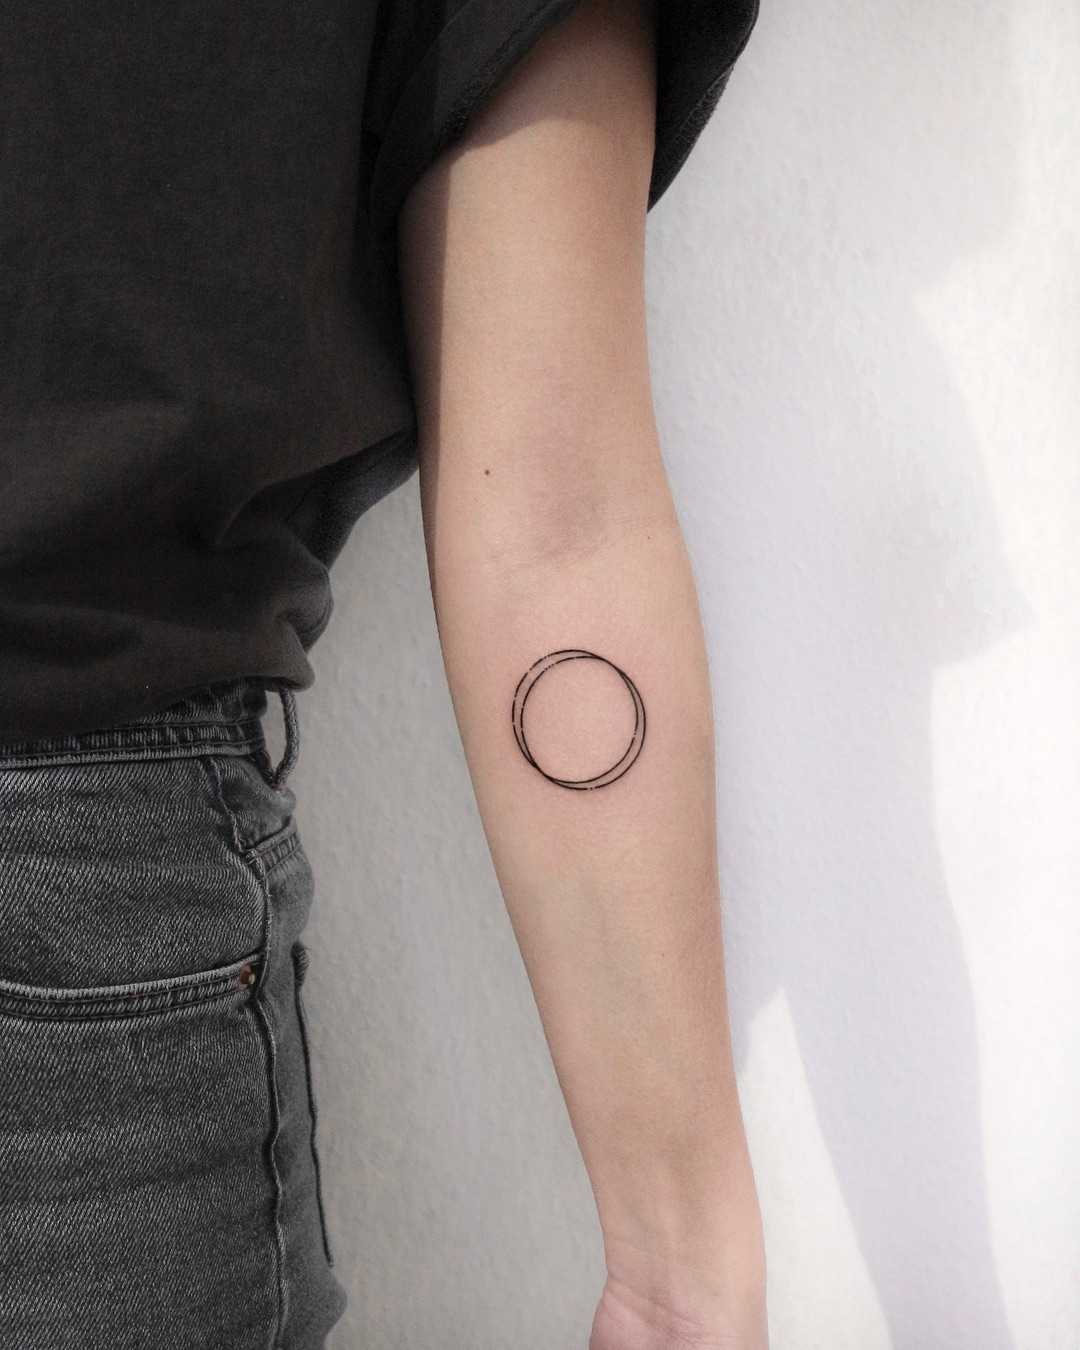 40 Insanely Gorgeous Circle Tattoo Designs - Bored Art